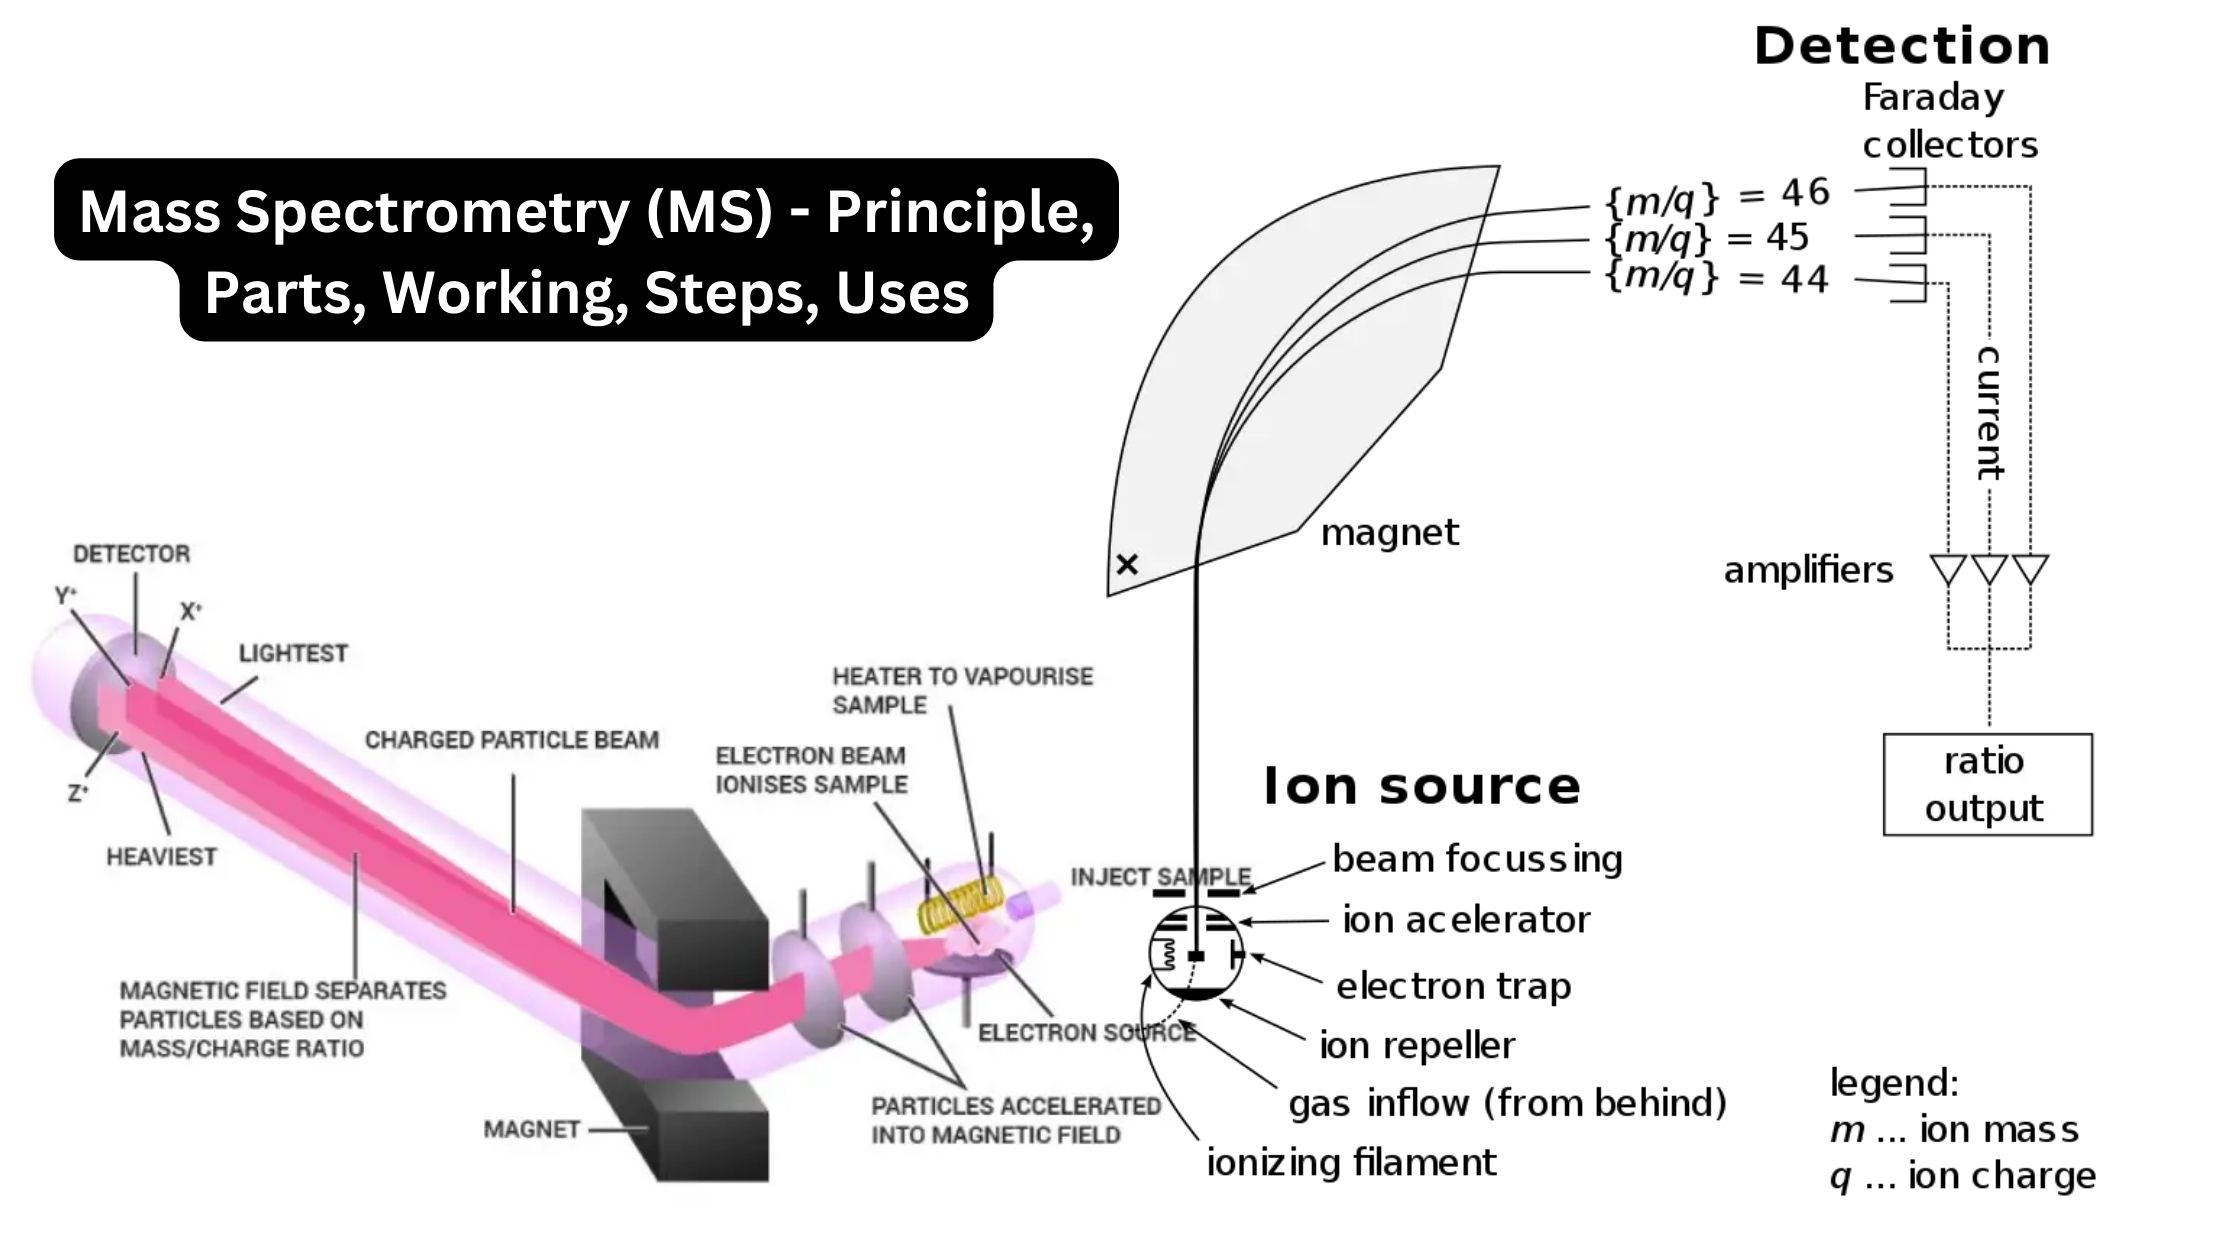 Mass Spectrometry (MS) - Principle, Parts, Working, Steps, Uses